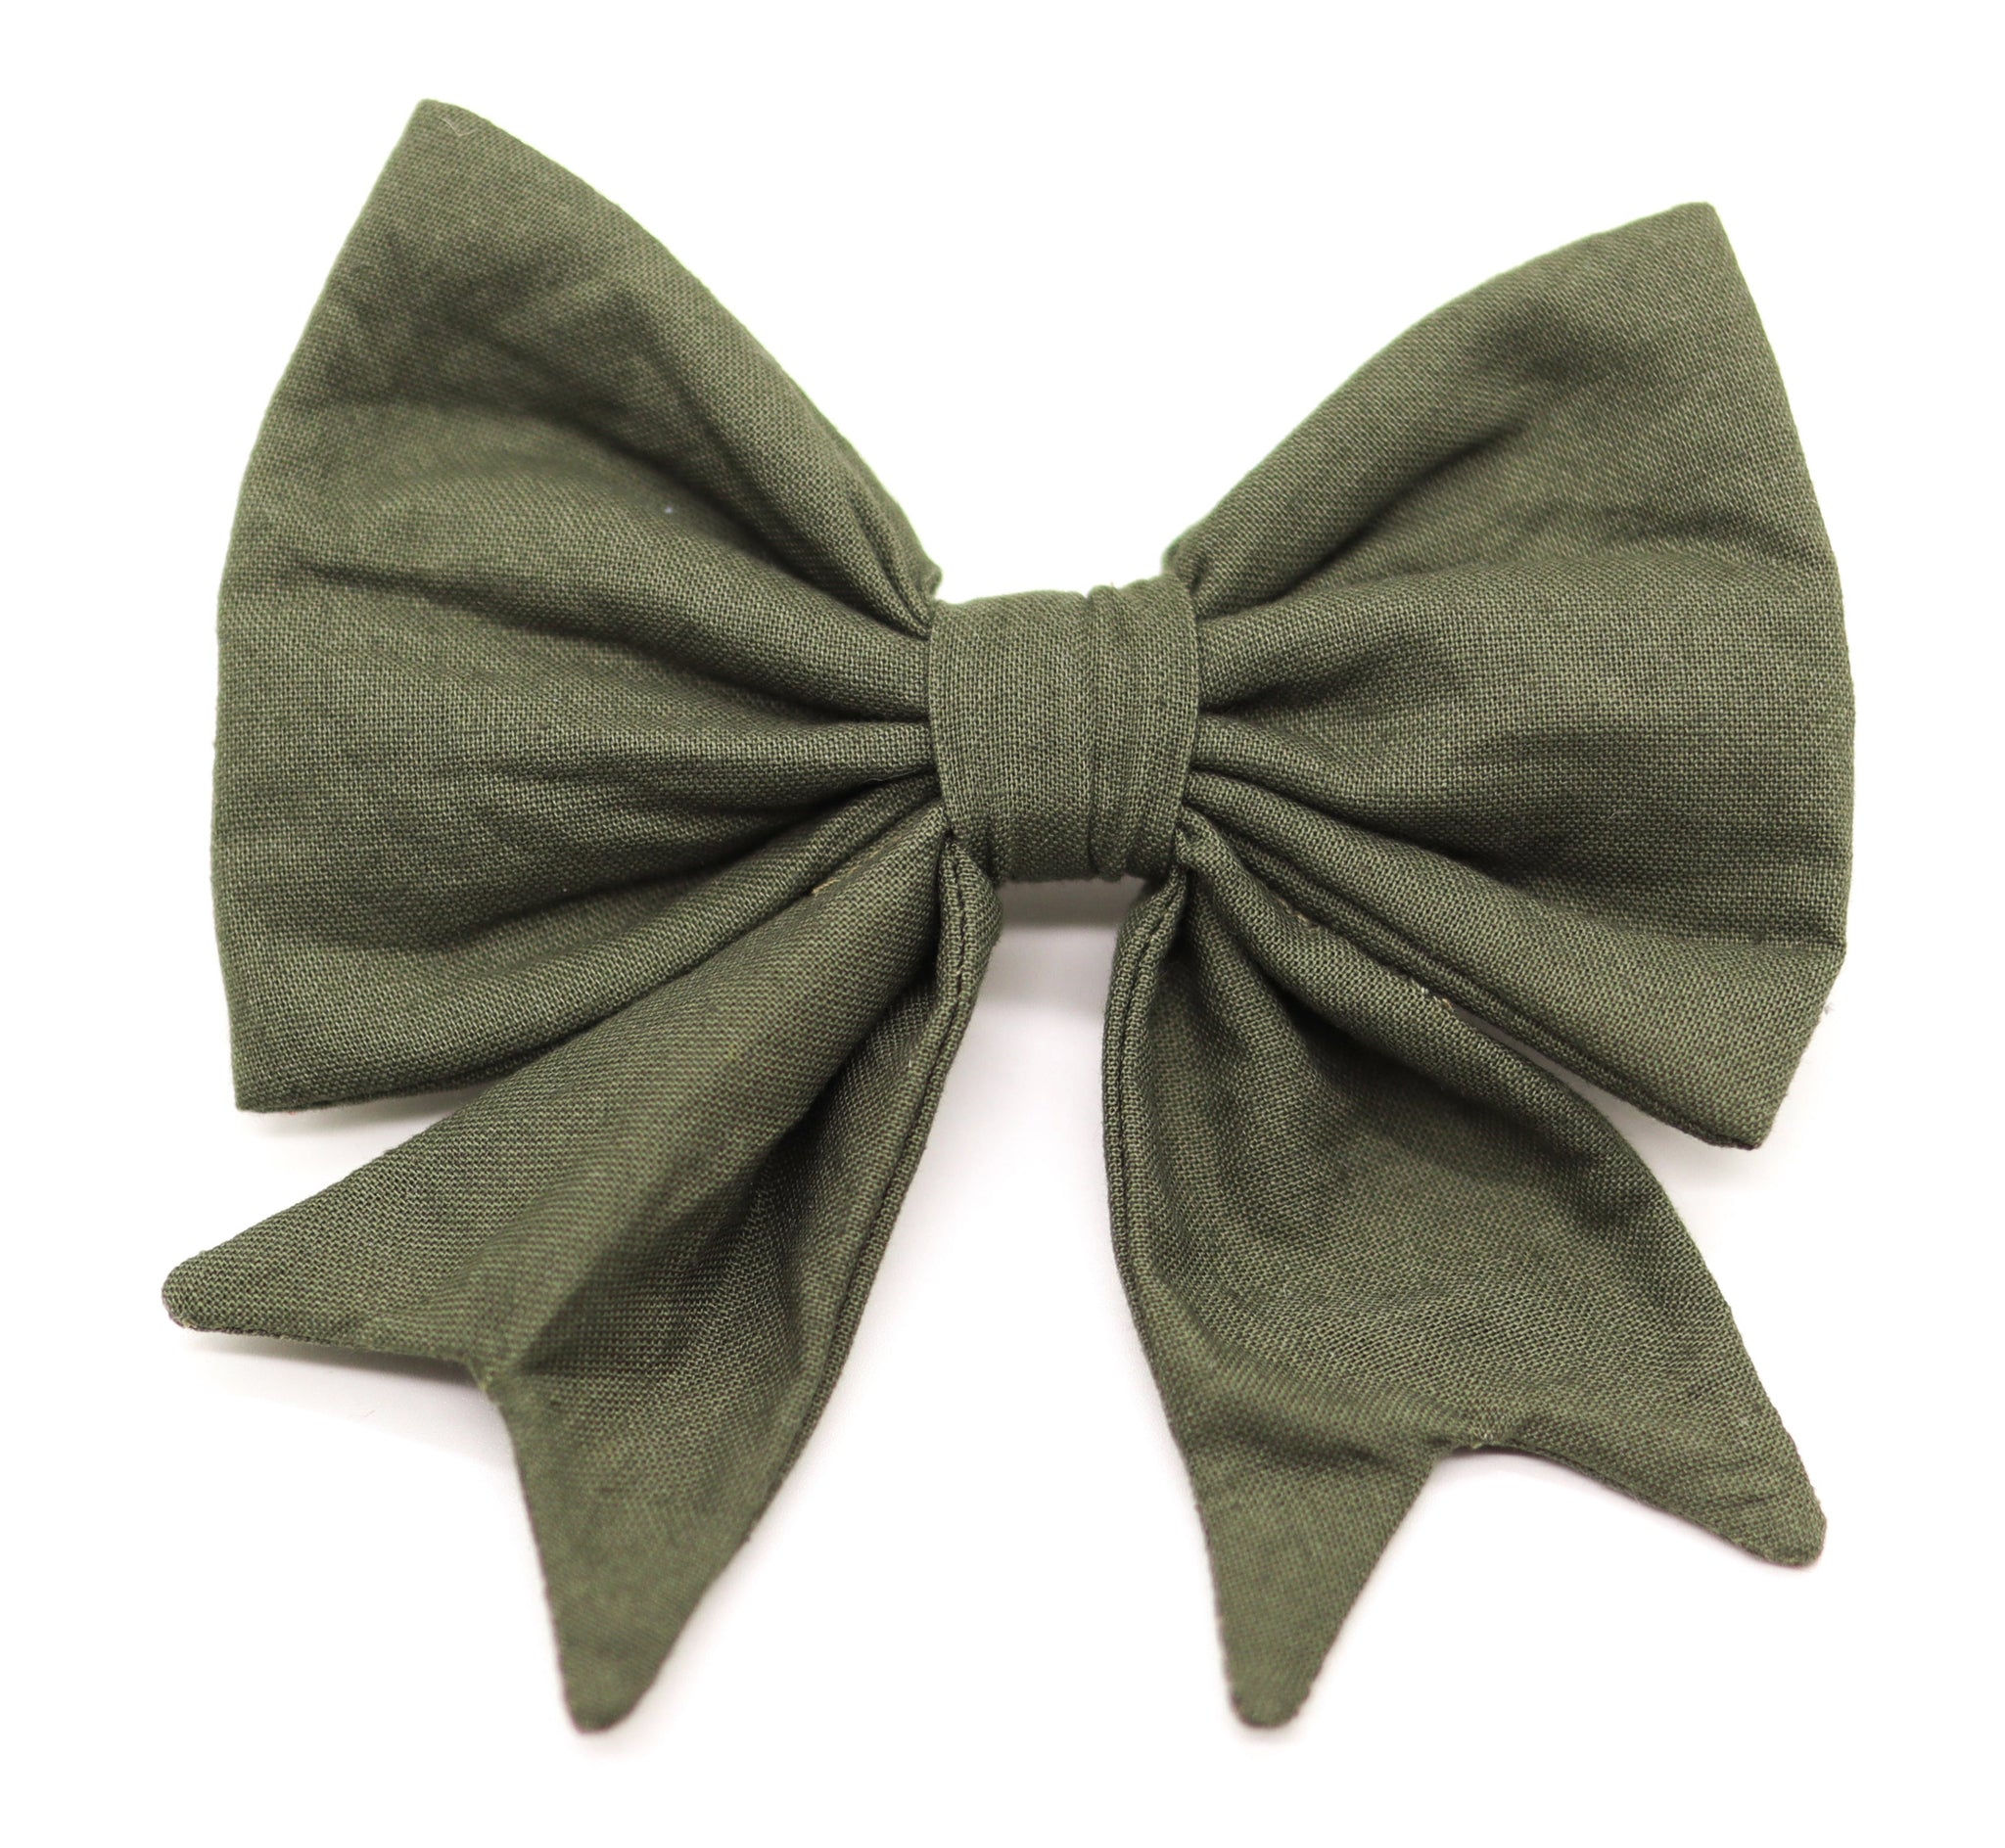 "Olive Uni" sailor bow for dog collars